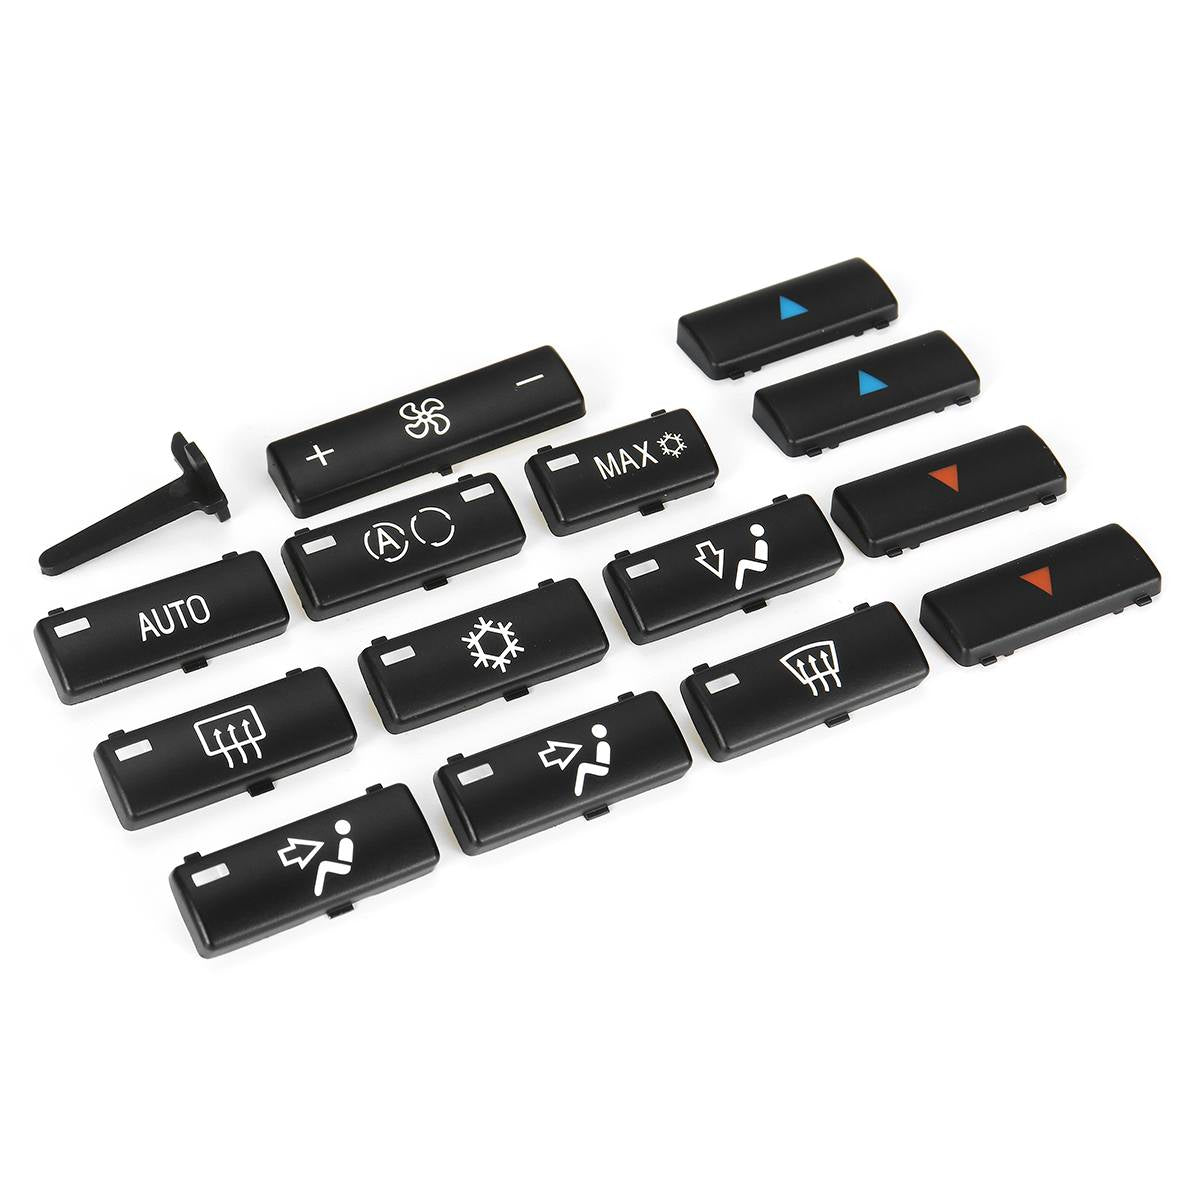 New 14 Button Key Caps Replacement Climate A/C Control Control Panel Switch Buttons Cover Suit For BMW E39 E53 525i 530i 540i M5 X5